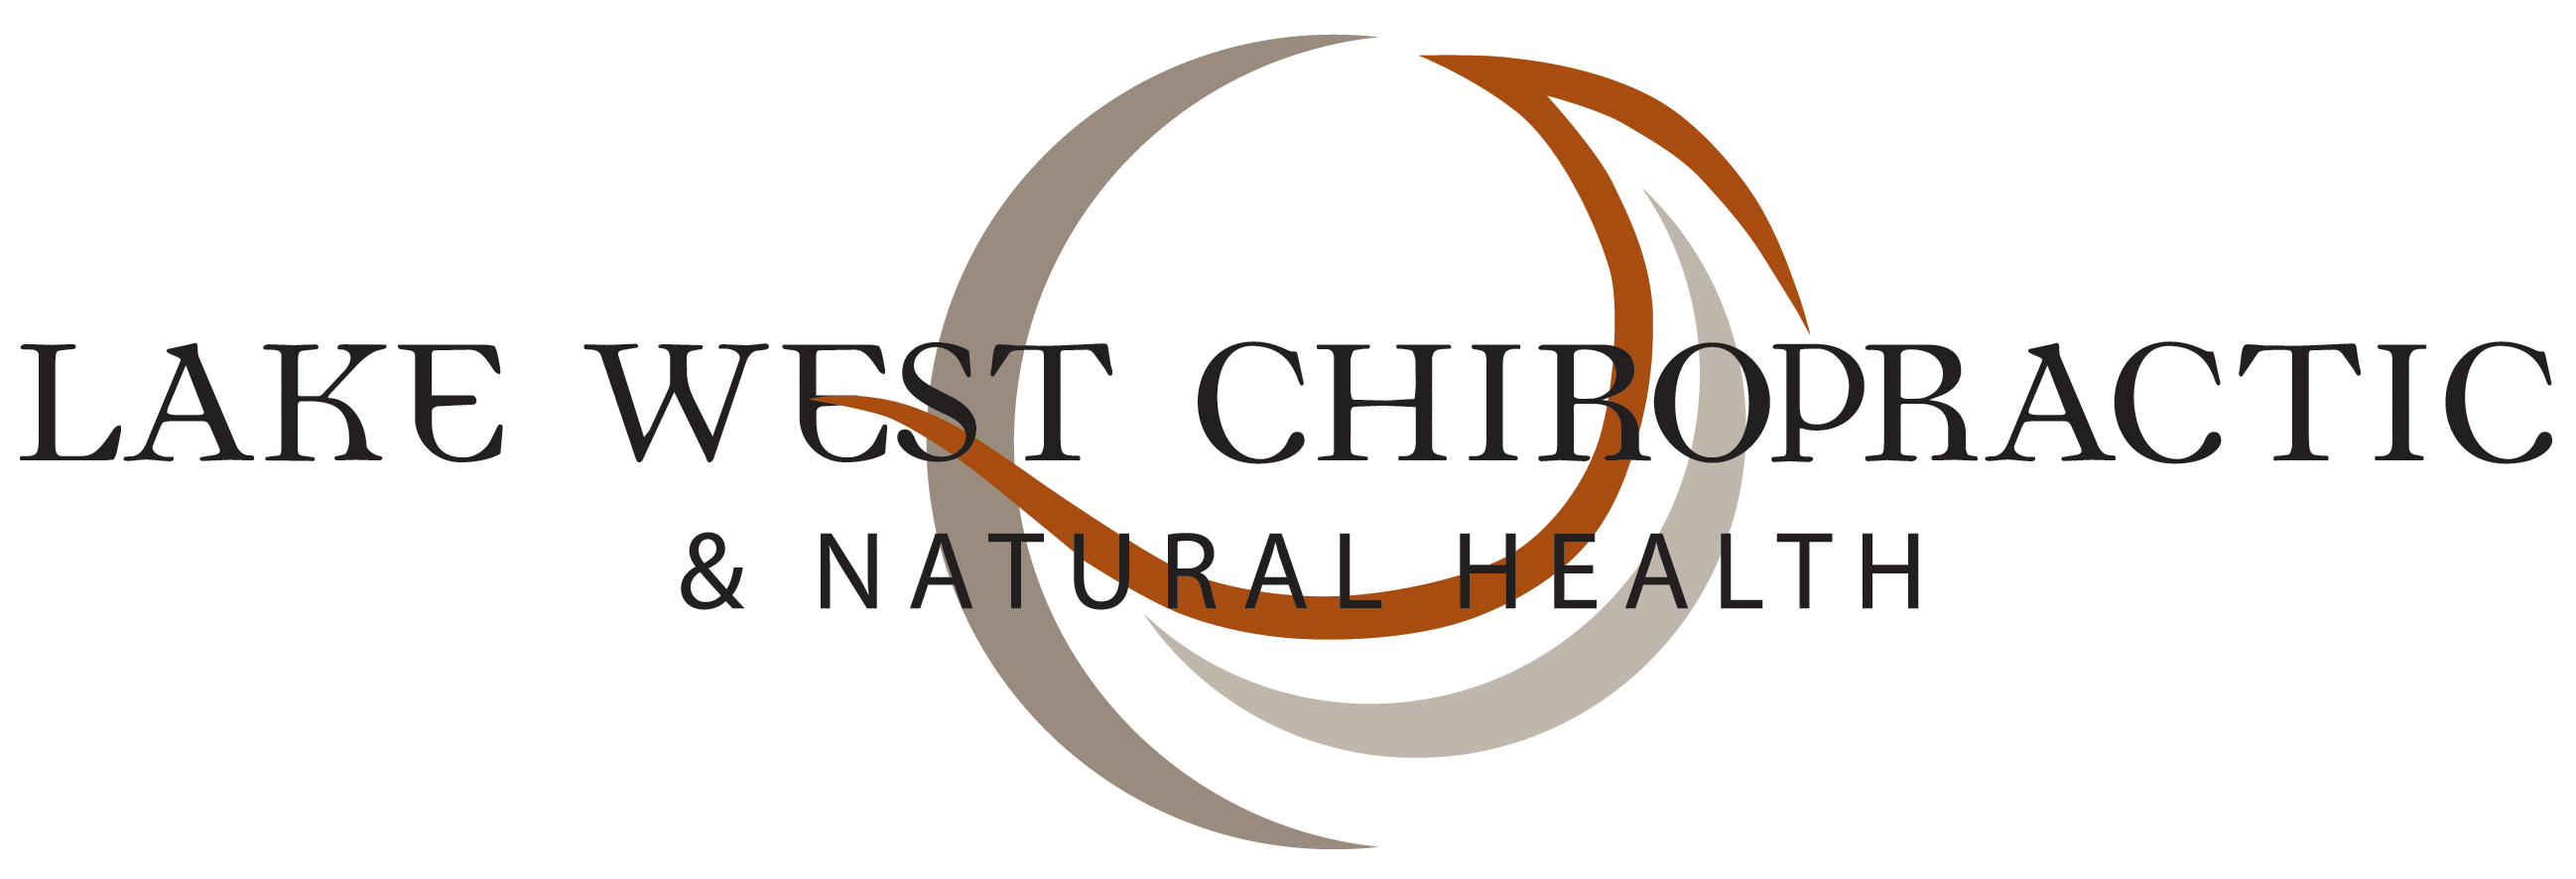 Lake West Chiropractic & Natural Health